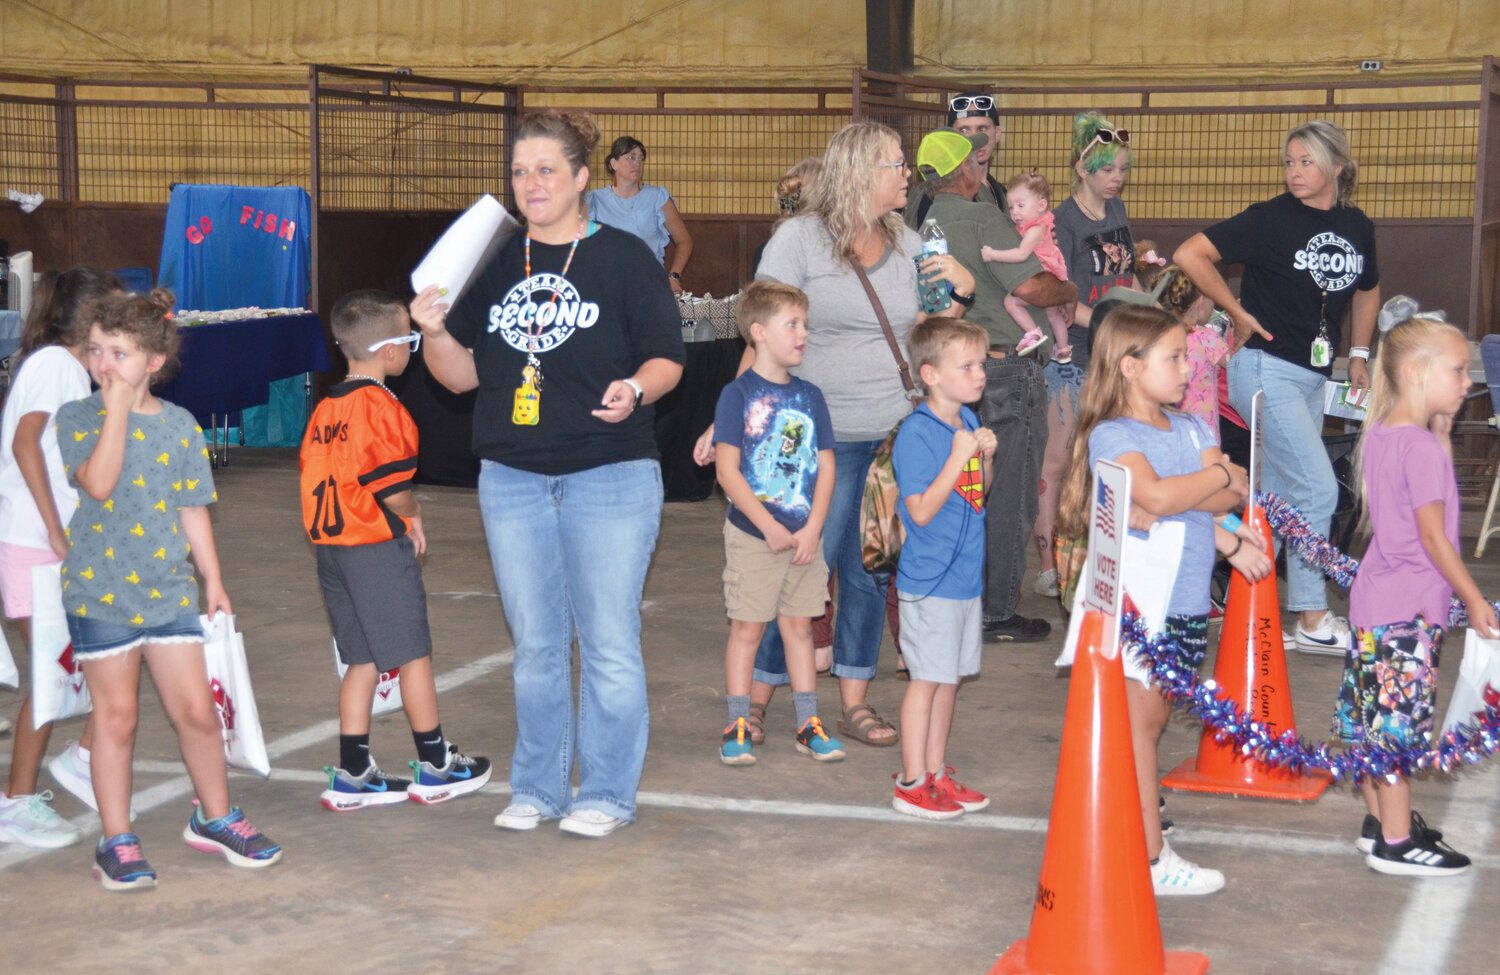 Voting lines were long at the county fair last Friday morning. Rudy B. Rabbit defeated Tommy C. Turtle 105-81 in the mock election.